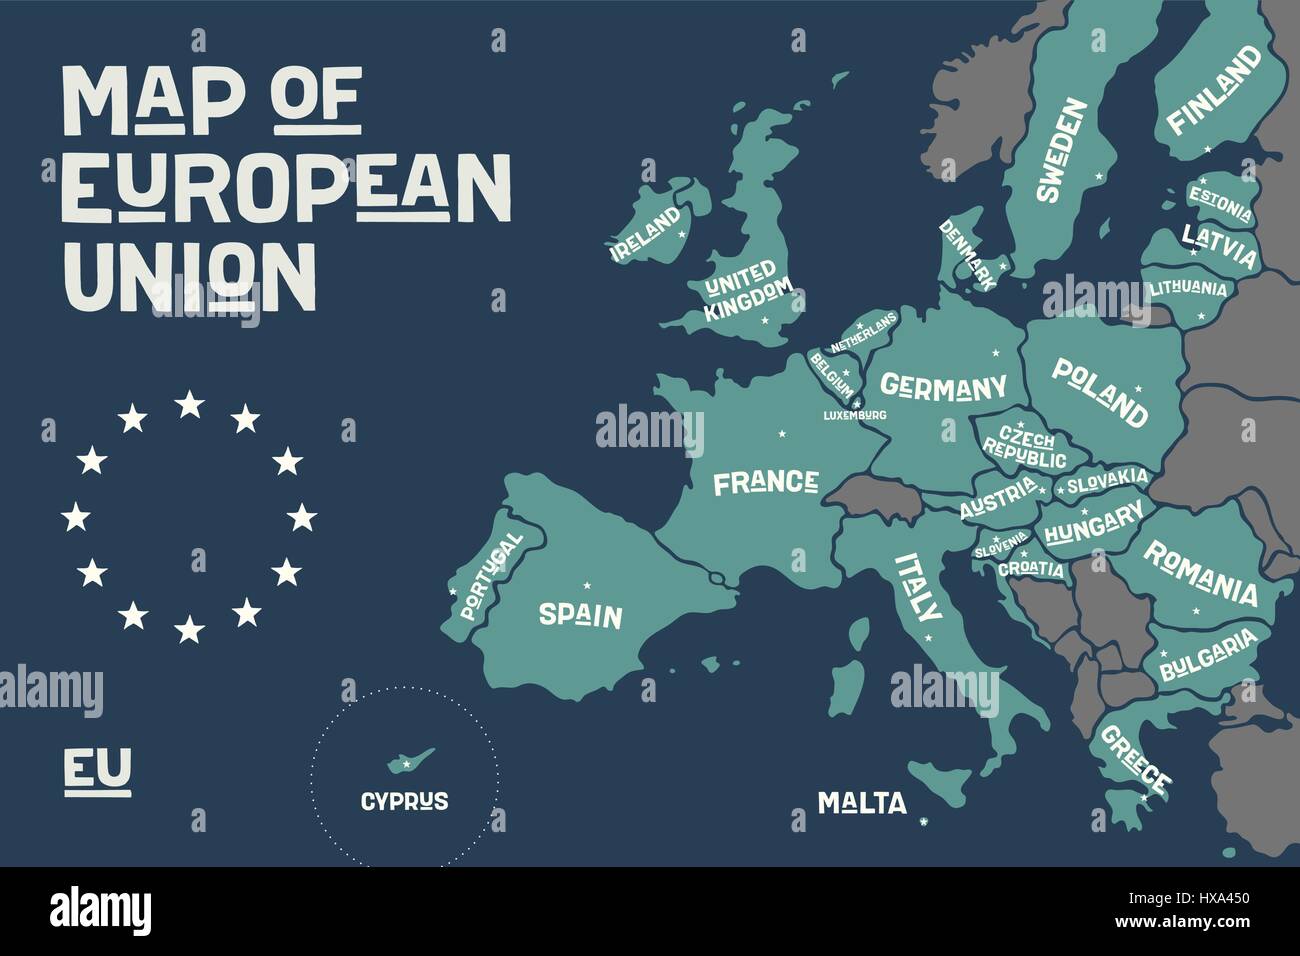 Poster map of the European Union with country names Stock Vector